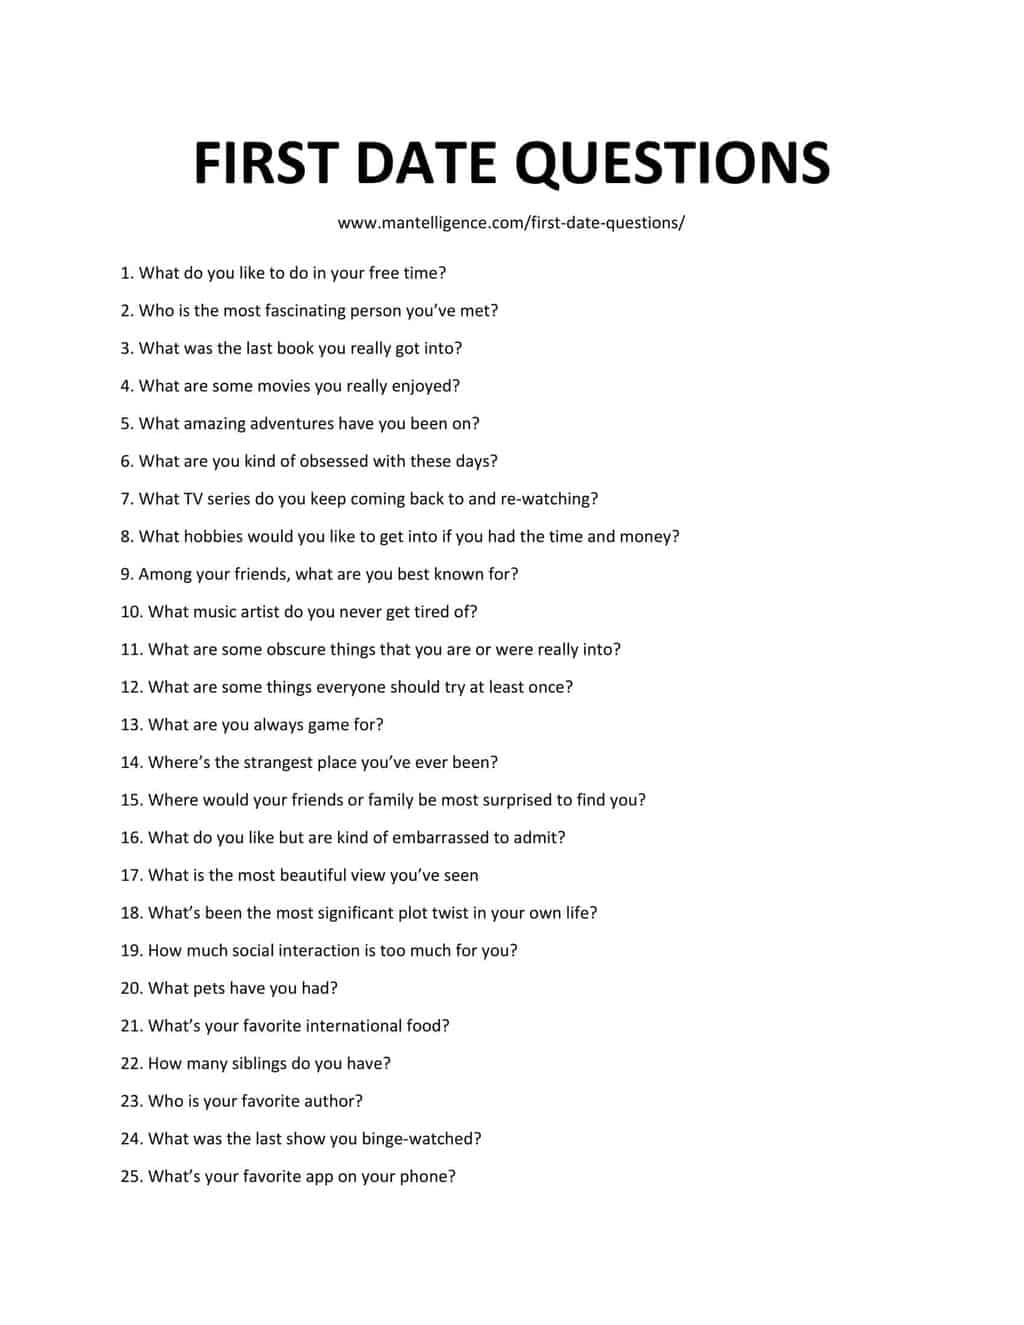 50 questions to ask a first date